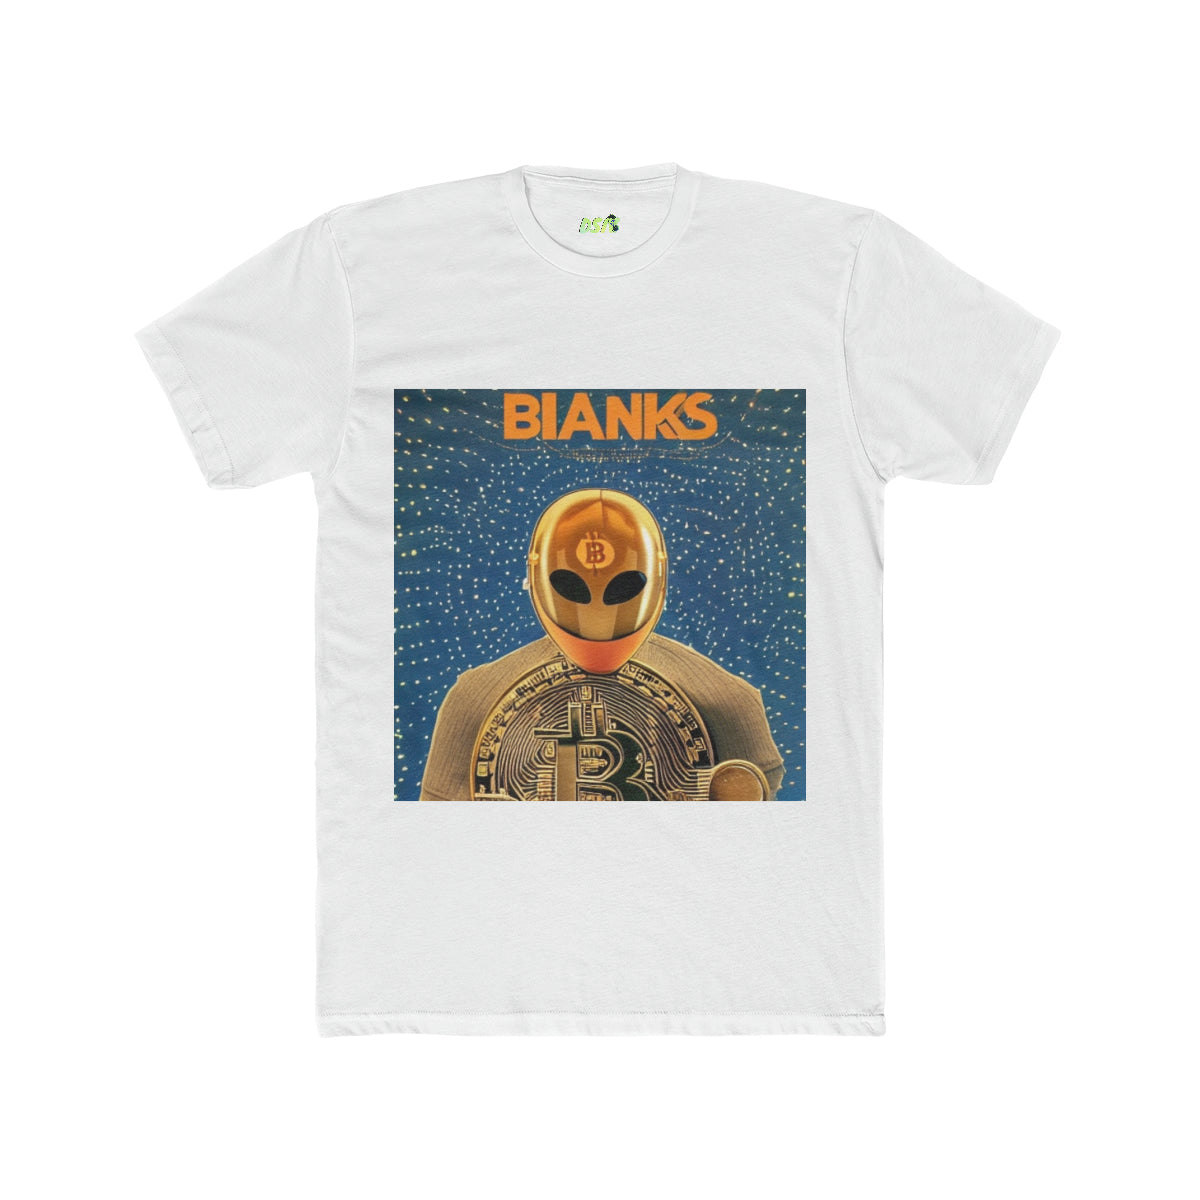 BTC BIANKS - Obey The Code T-Shirt Collection - DSIV